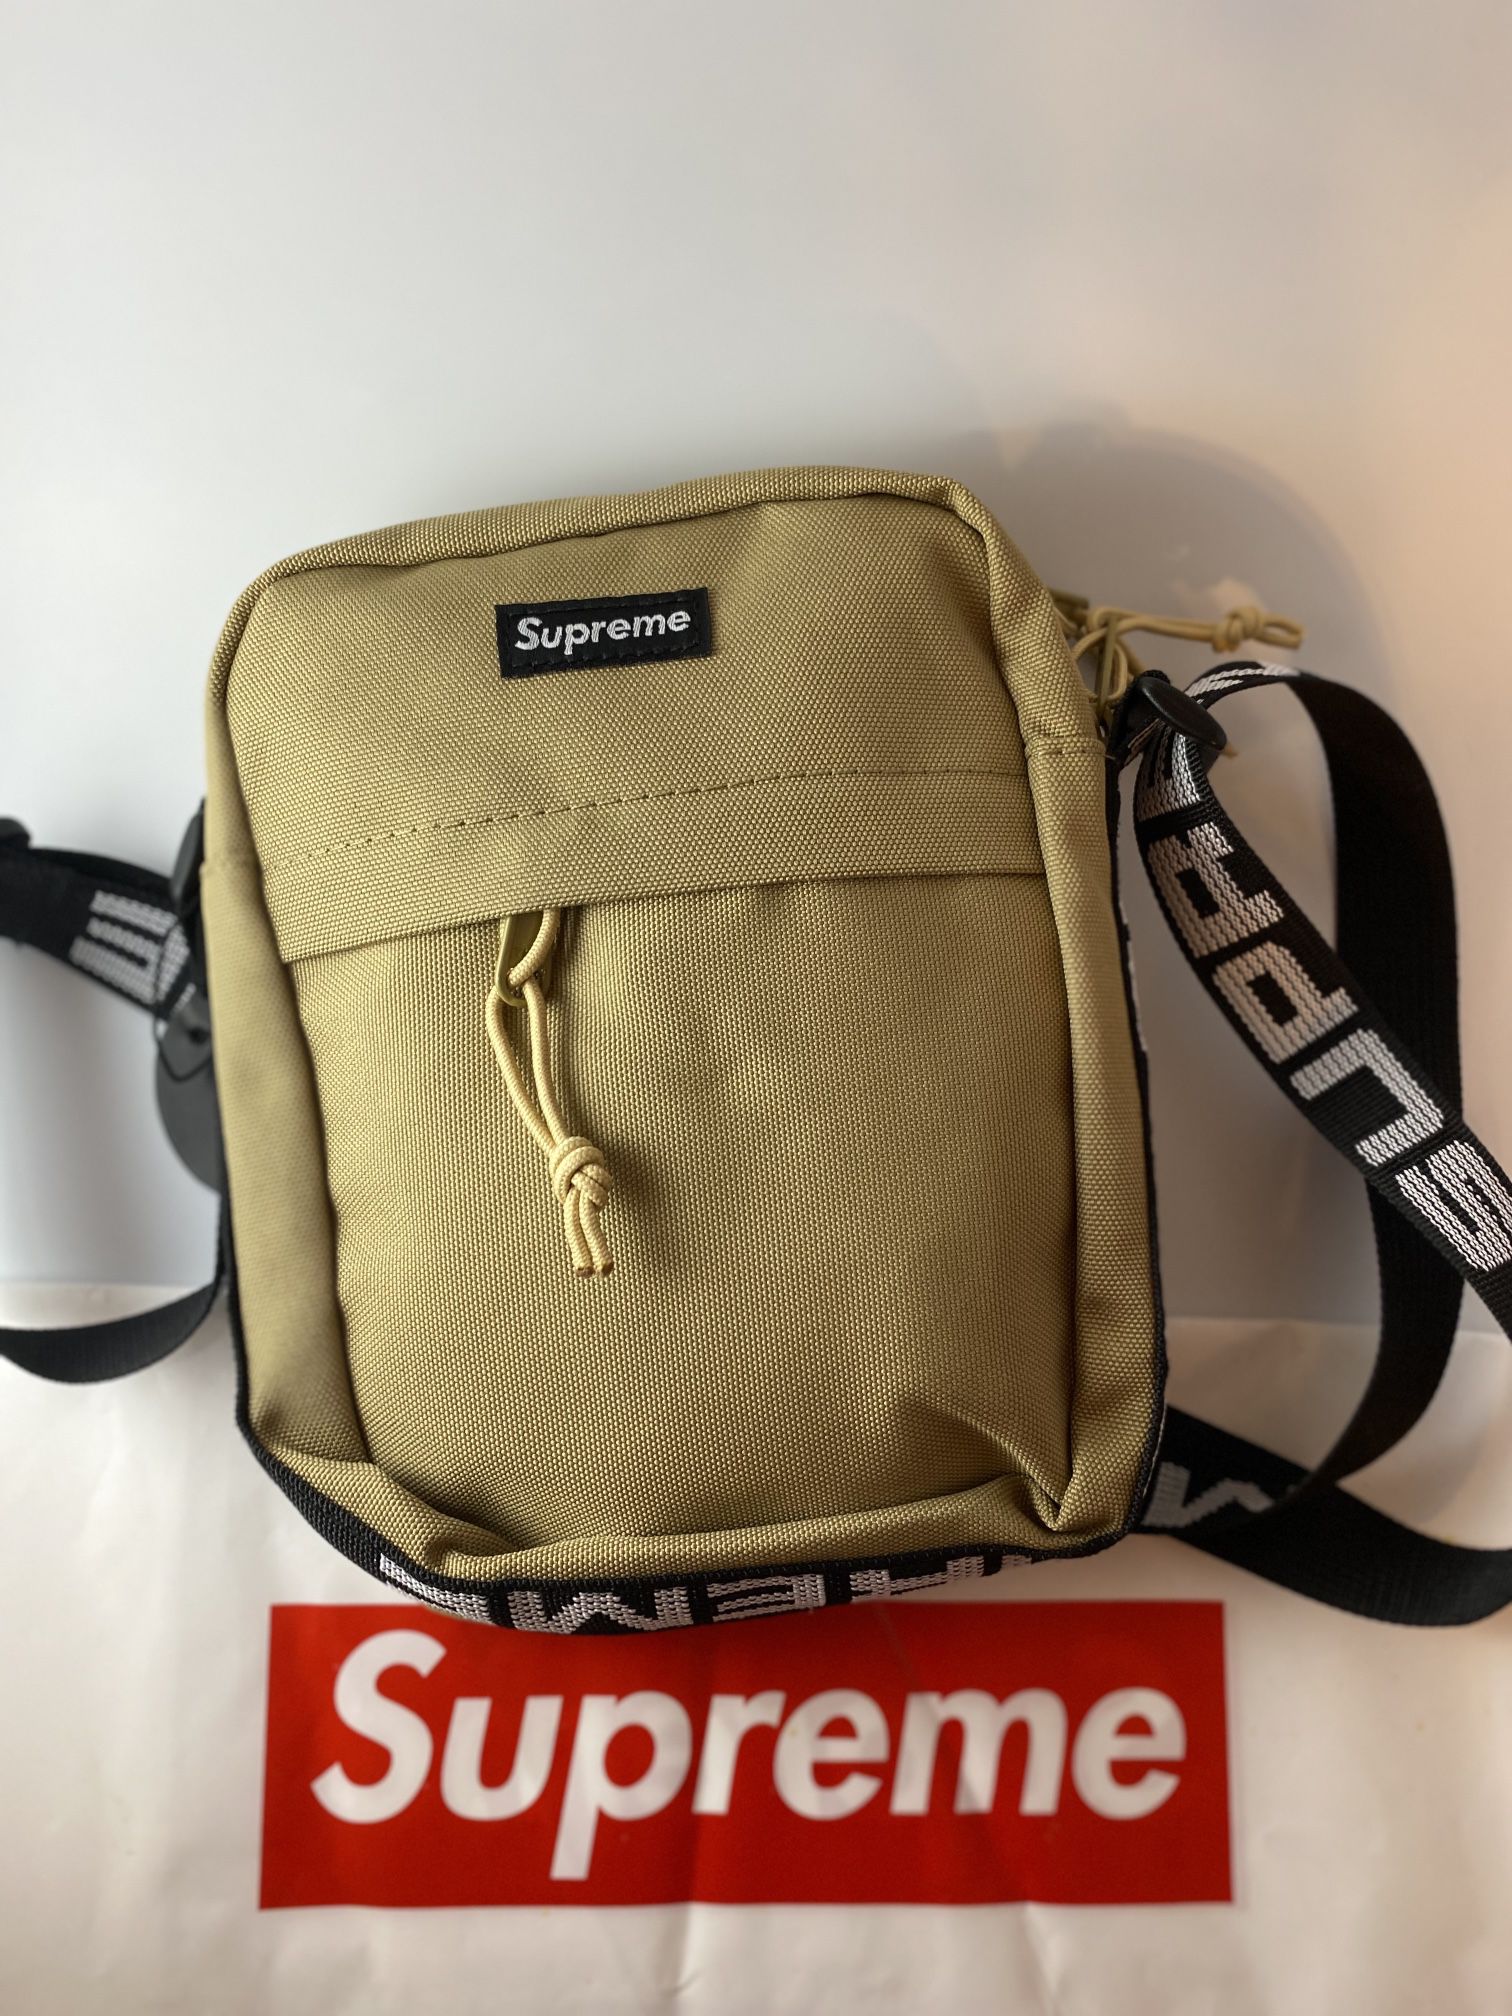 Supreme Shoulder Bags Brand New Blue & Tan for Sale in Queens, NY - OfferUp